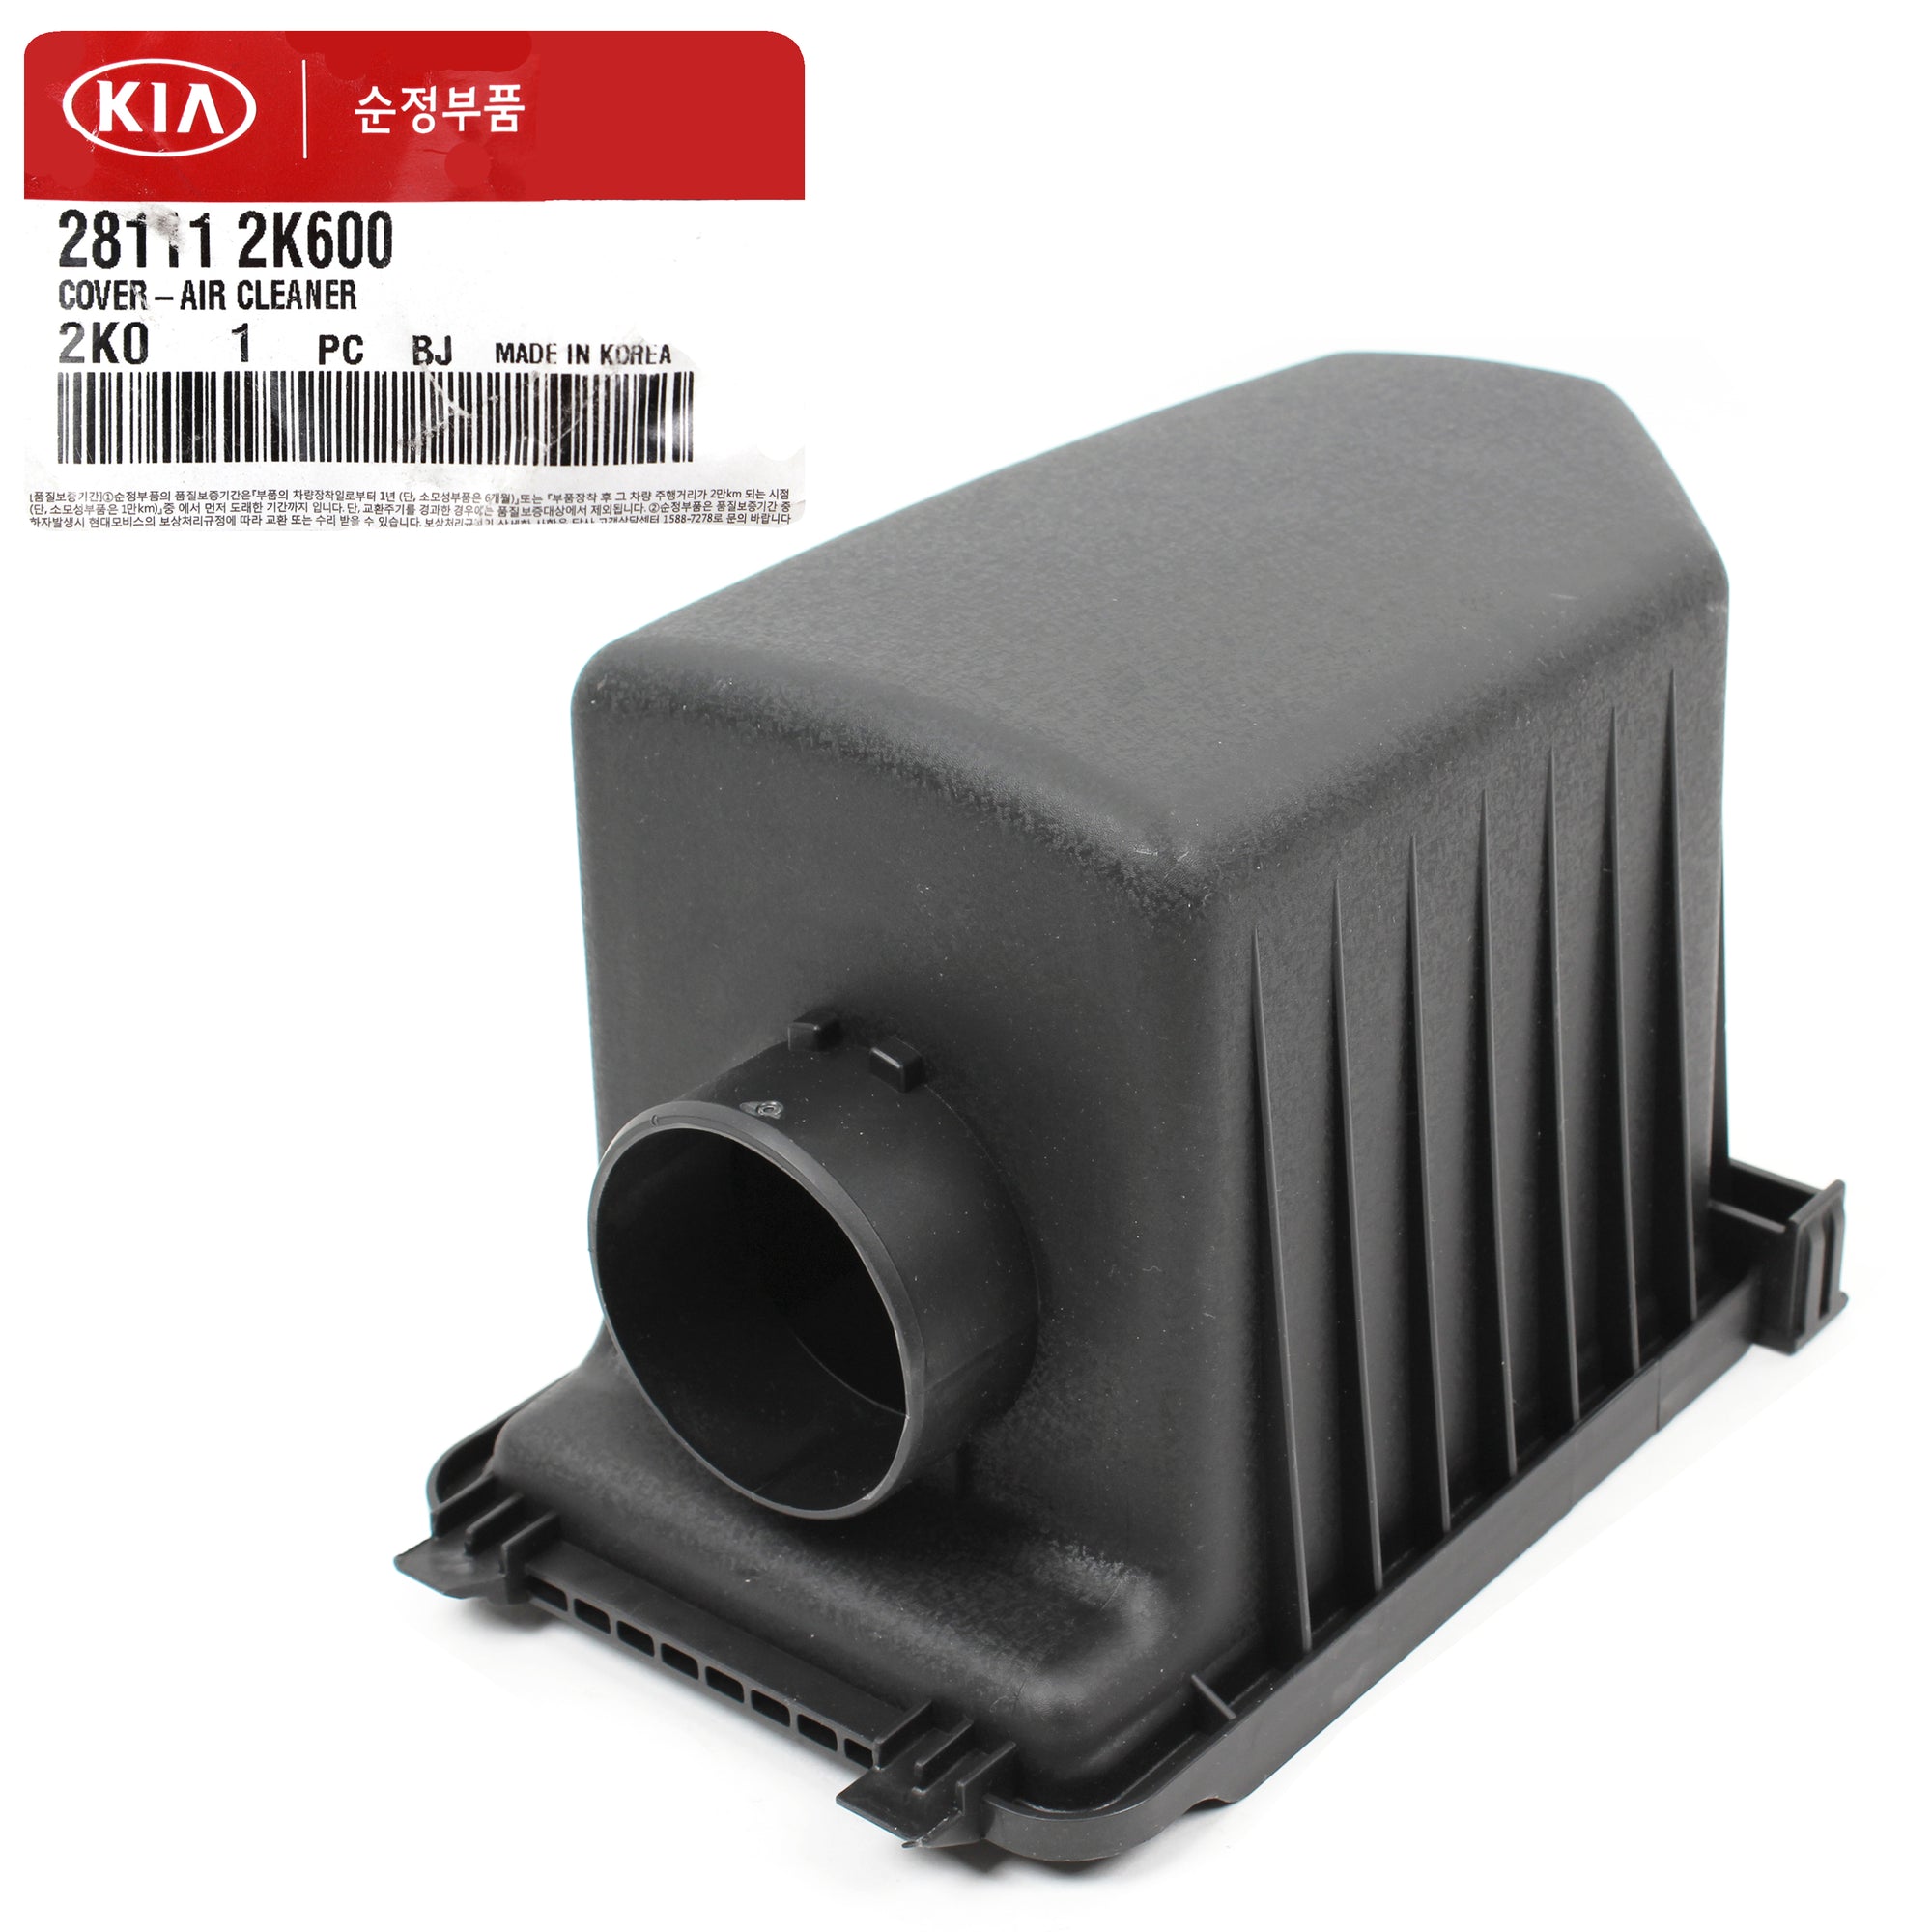 GENUINE Air Cleaner Cover for 2012 2013 Kia Soul 281112K600